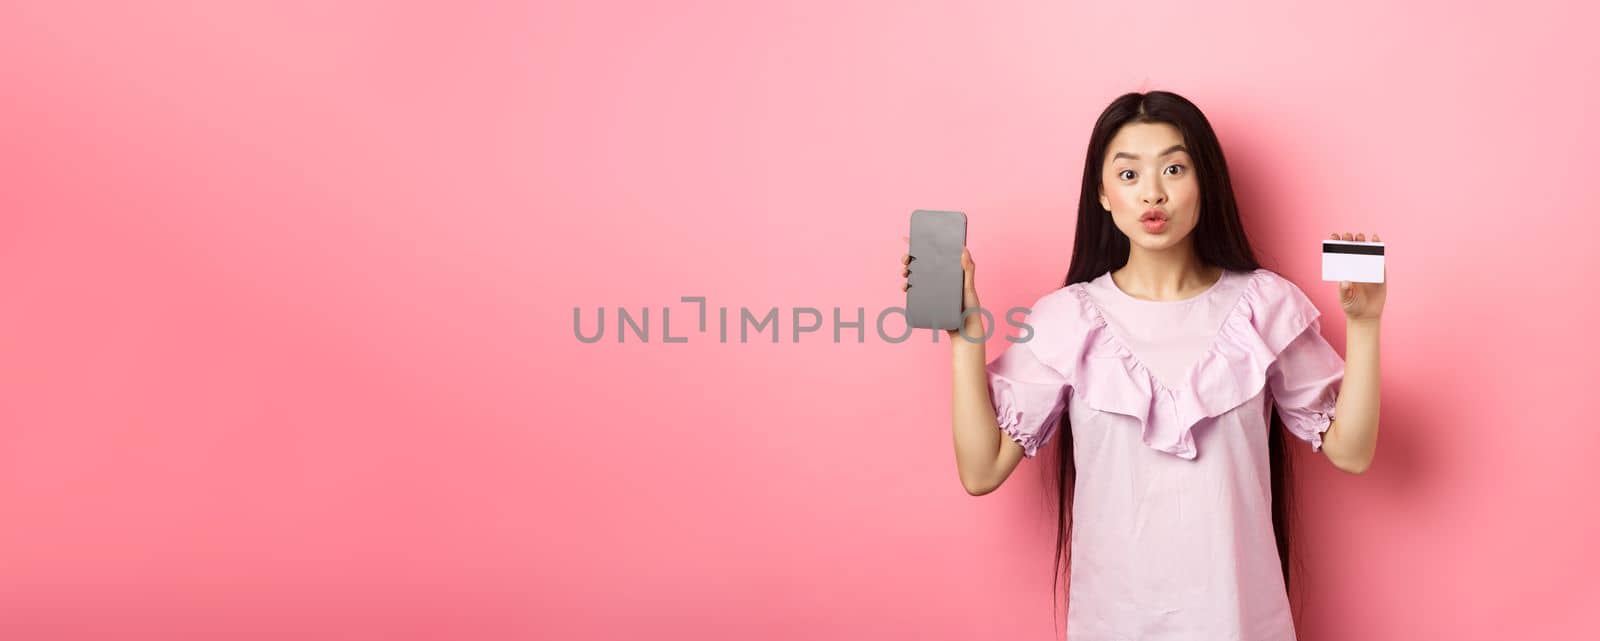 Online shopping. Excited asian woman showing plastic credit card with empty smartphone screen, advertising internet shop, standing on pink background.